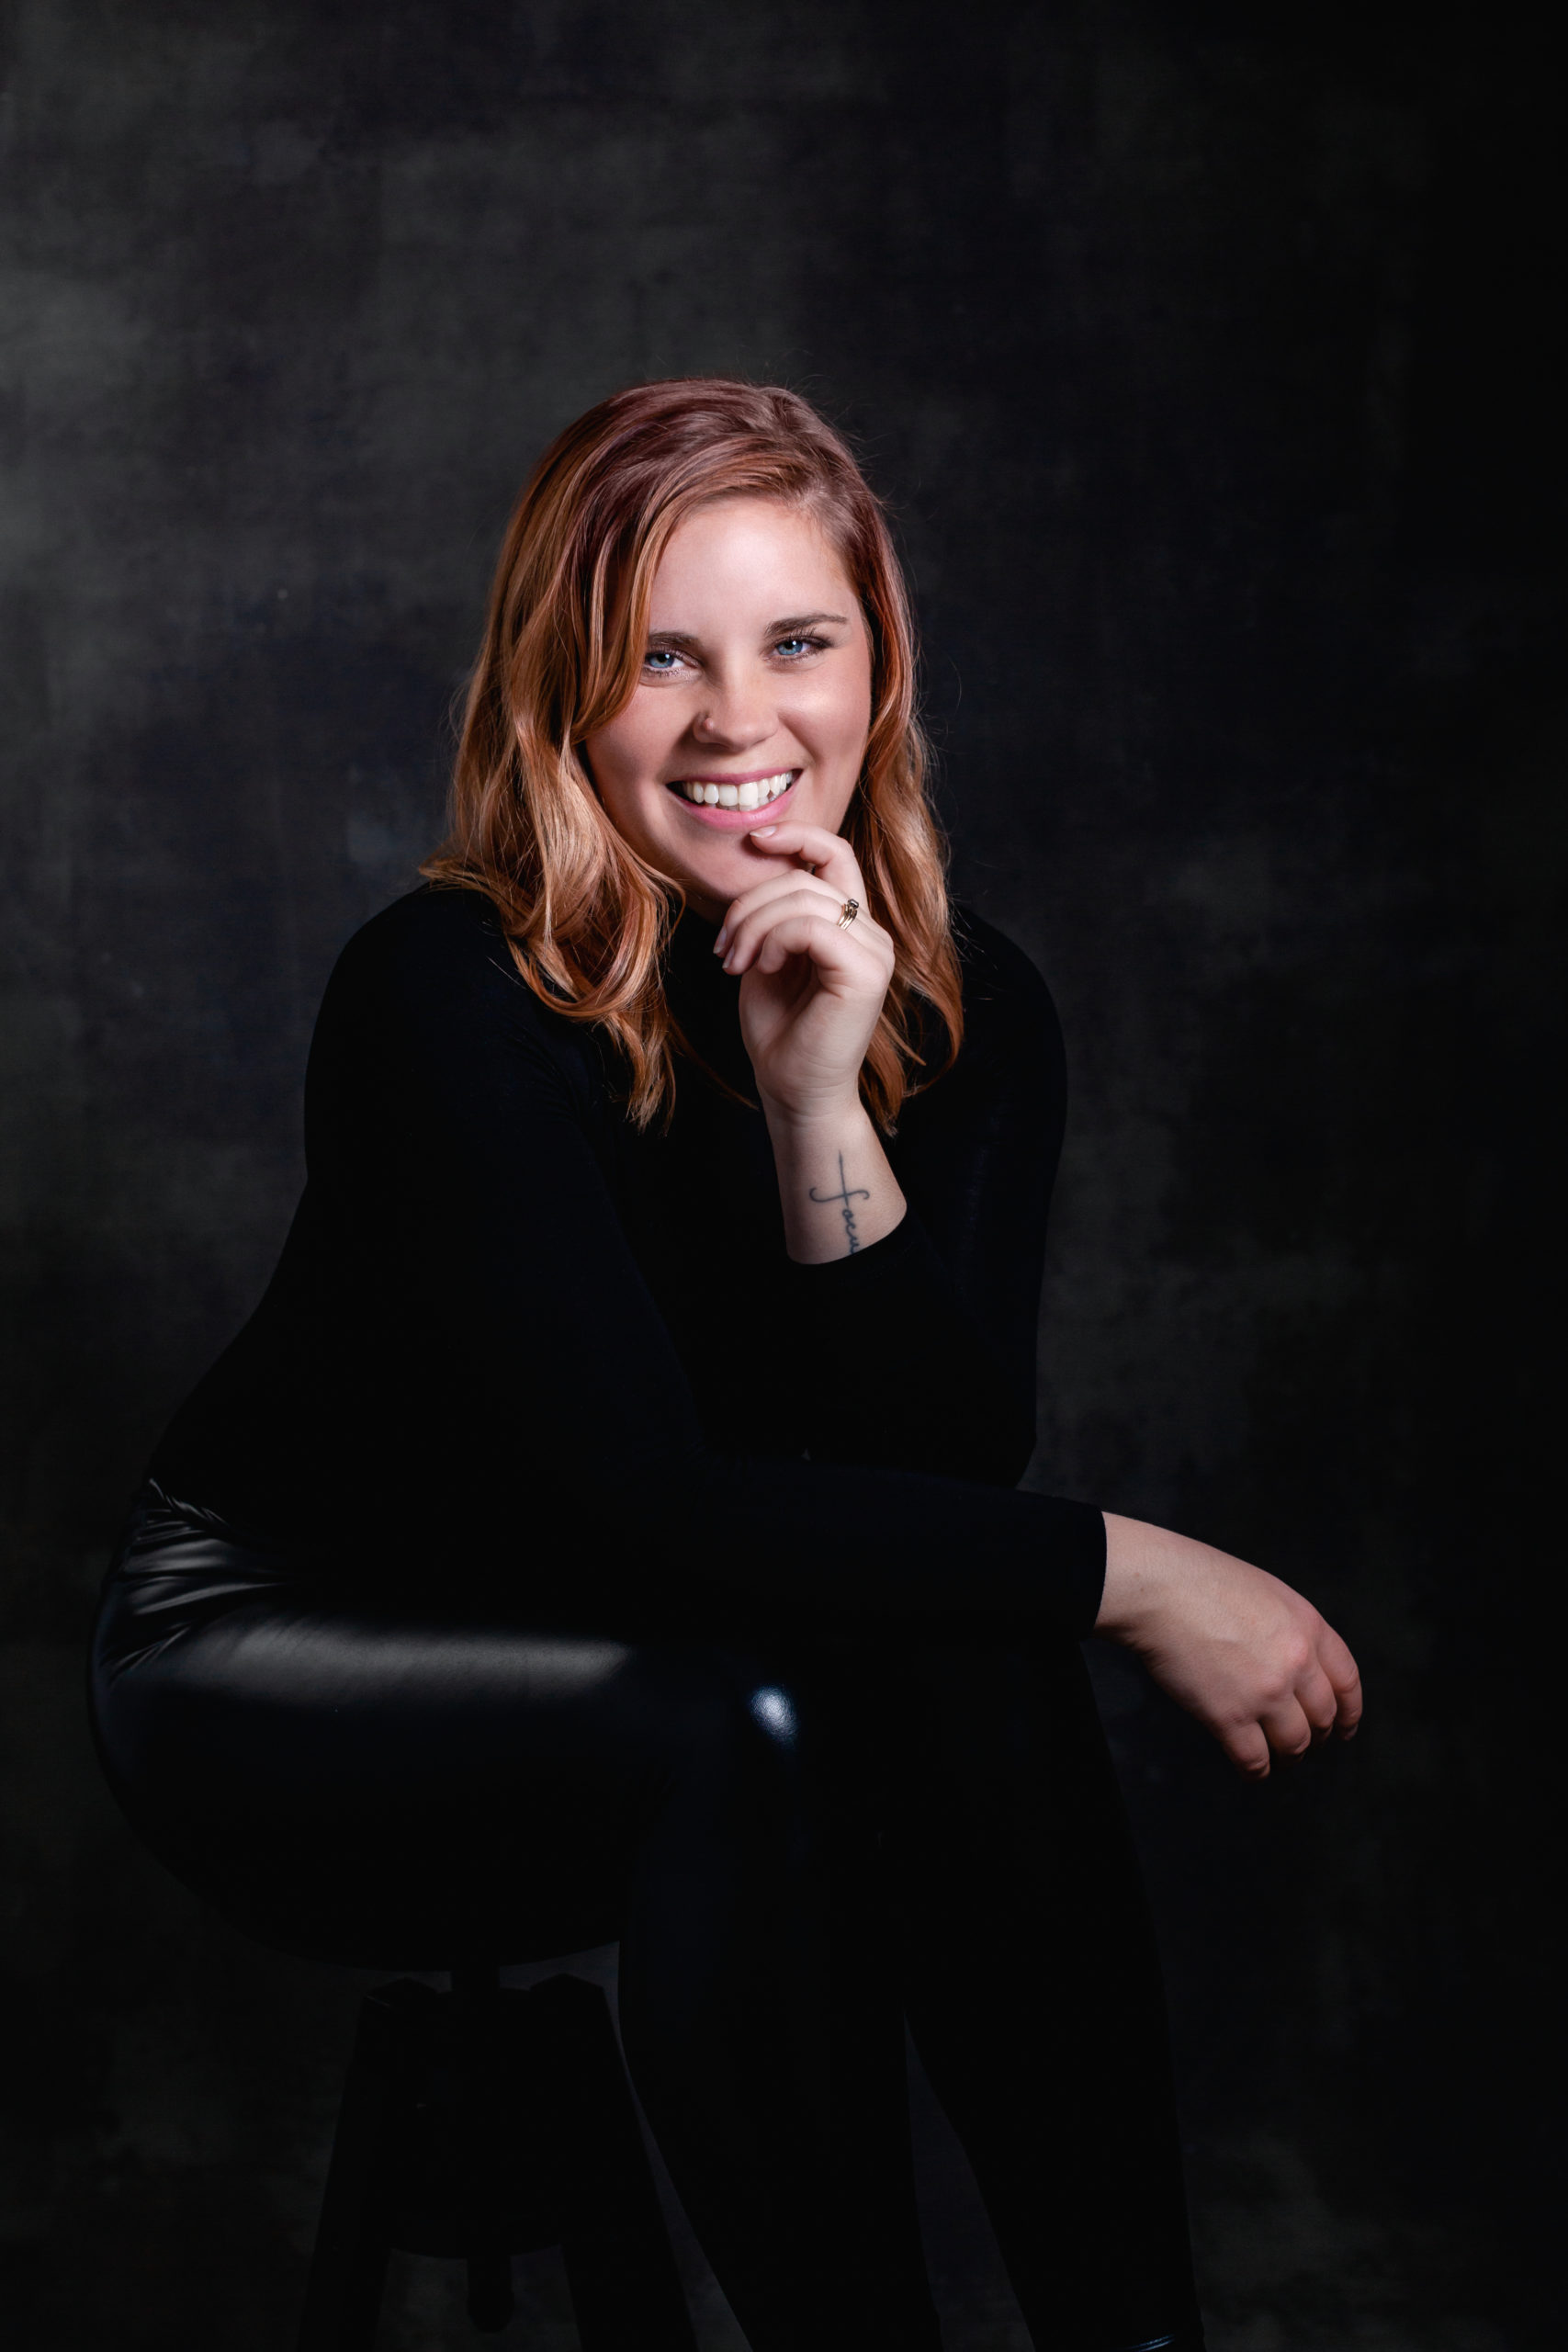 Headshot image of San Diego Photographer wearing black with black background. Photographer is sitting on a stool with knees bent and one hand on her chin smiling and looking at camera.